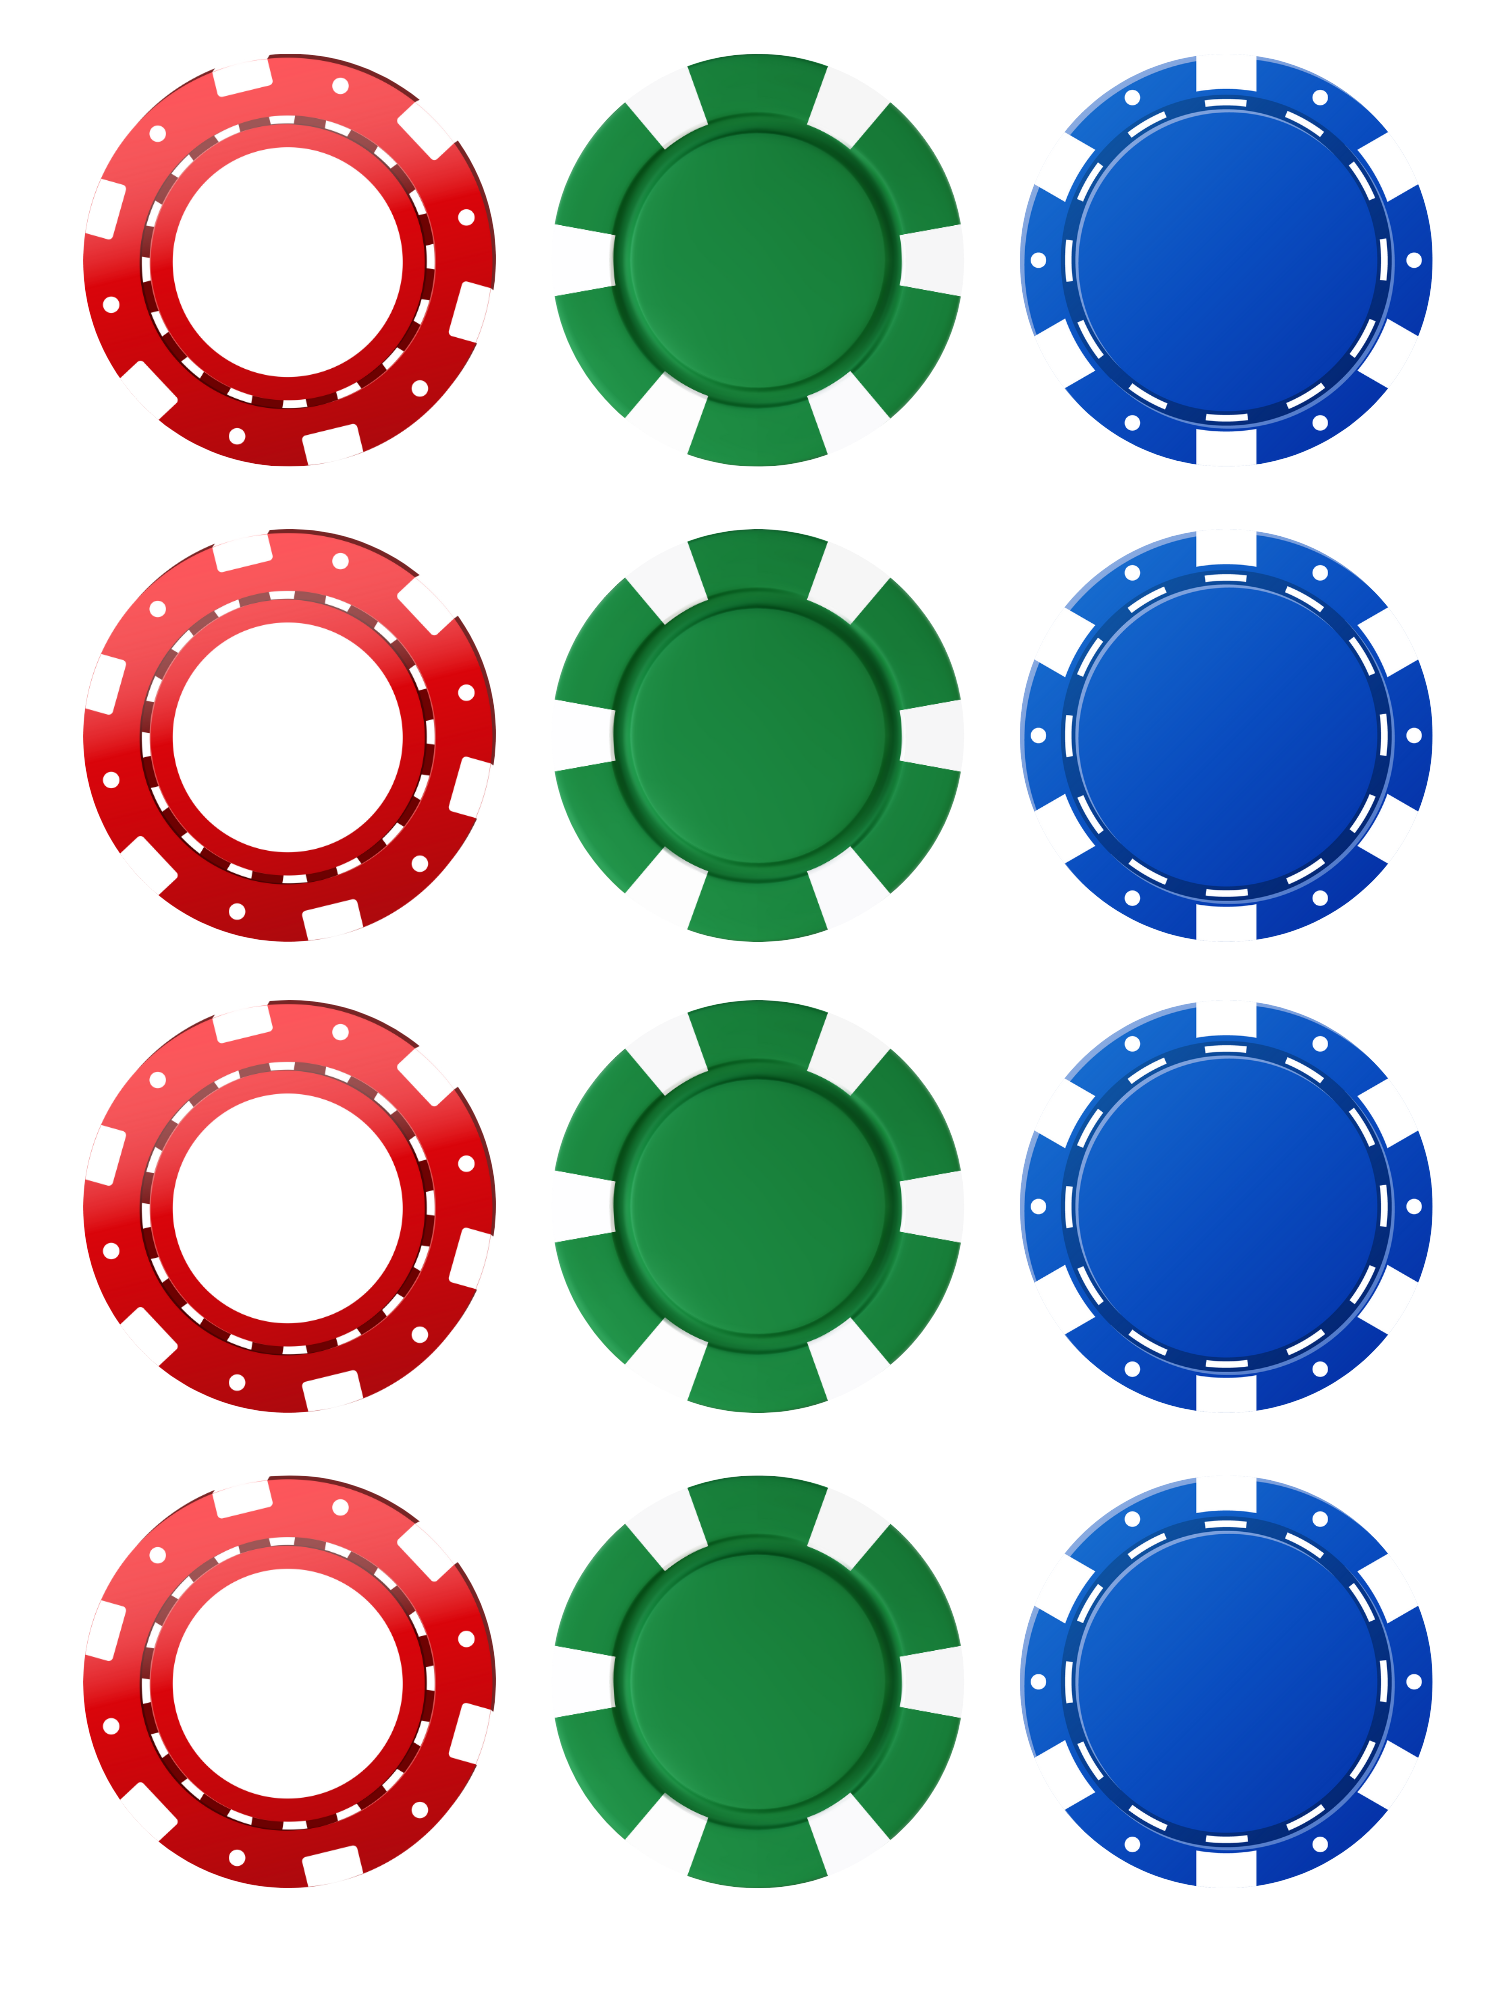 Casino Chips Poker chips edible printed Cupcake Toppers Icing Sheet of 12 Toppers